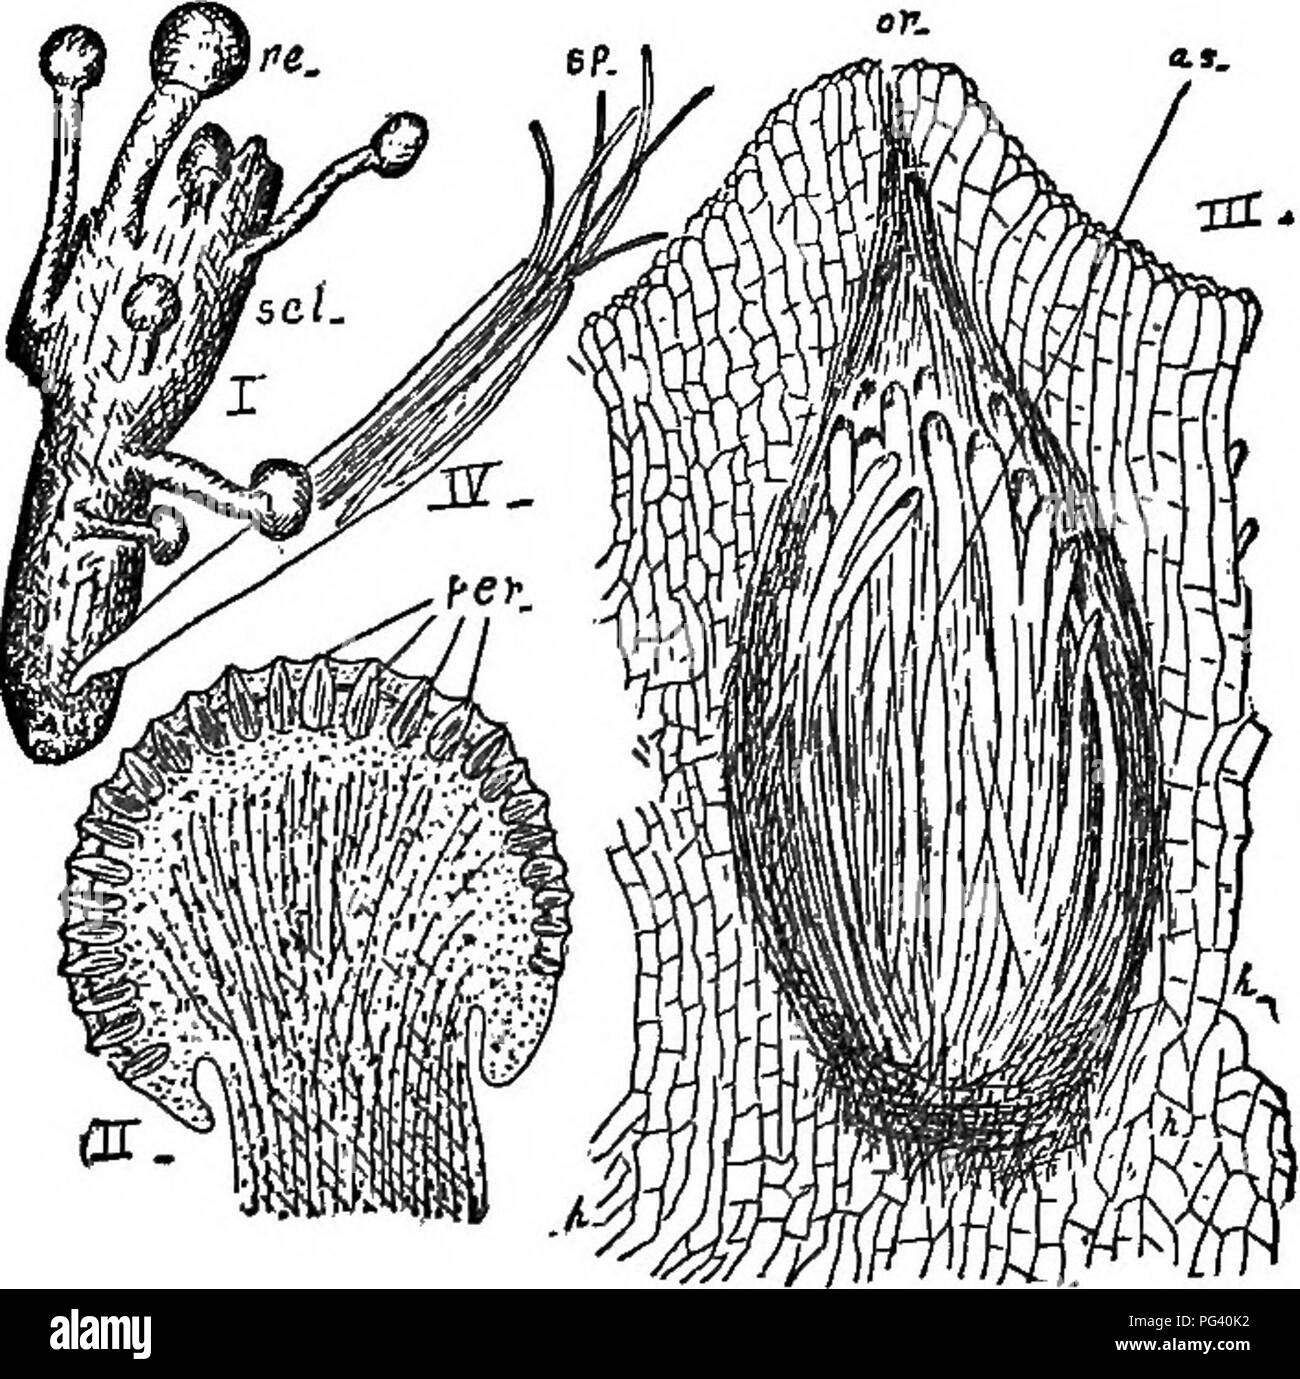 . The elements of botany embracing organography, histology, vegetable physiology, systematic botany and economic botany ... together with a complete glossary of botanical terms. Botany. 140 SYSTEMATIC BOTANY. This sclerotium usually begins in the spring a new growth ; little branches are produced, each with a globular head (Fig. 254, J), in the cortical region of which the numerous flask-shaped perithecia (Fig. 254, II, III} are produced. The elongated asci (Fig. 254, III) bear attenuated spores (Fig. 254, sp), which germinate and produce the mycelium, which, in turn, infests the young ovaries Stock Photo